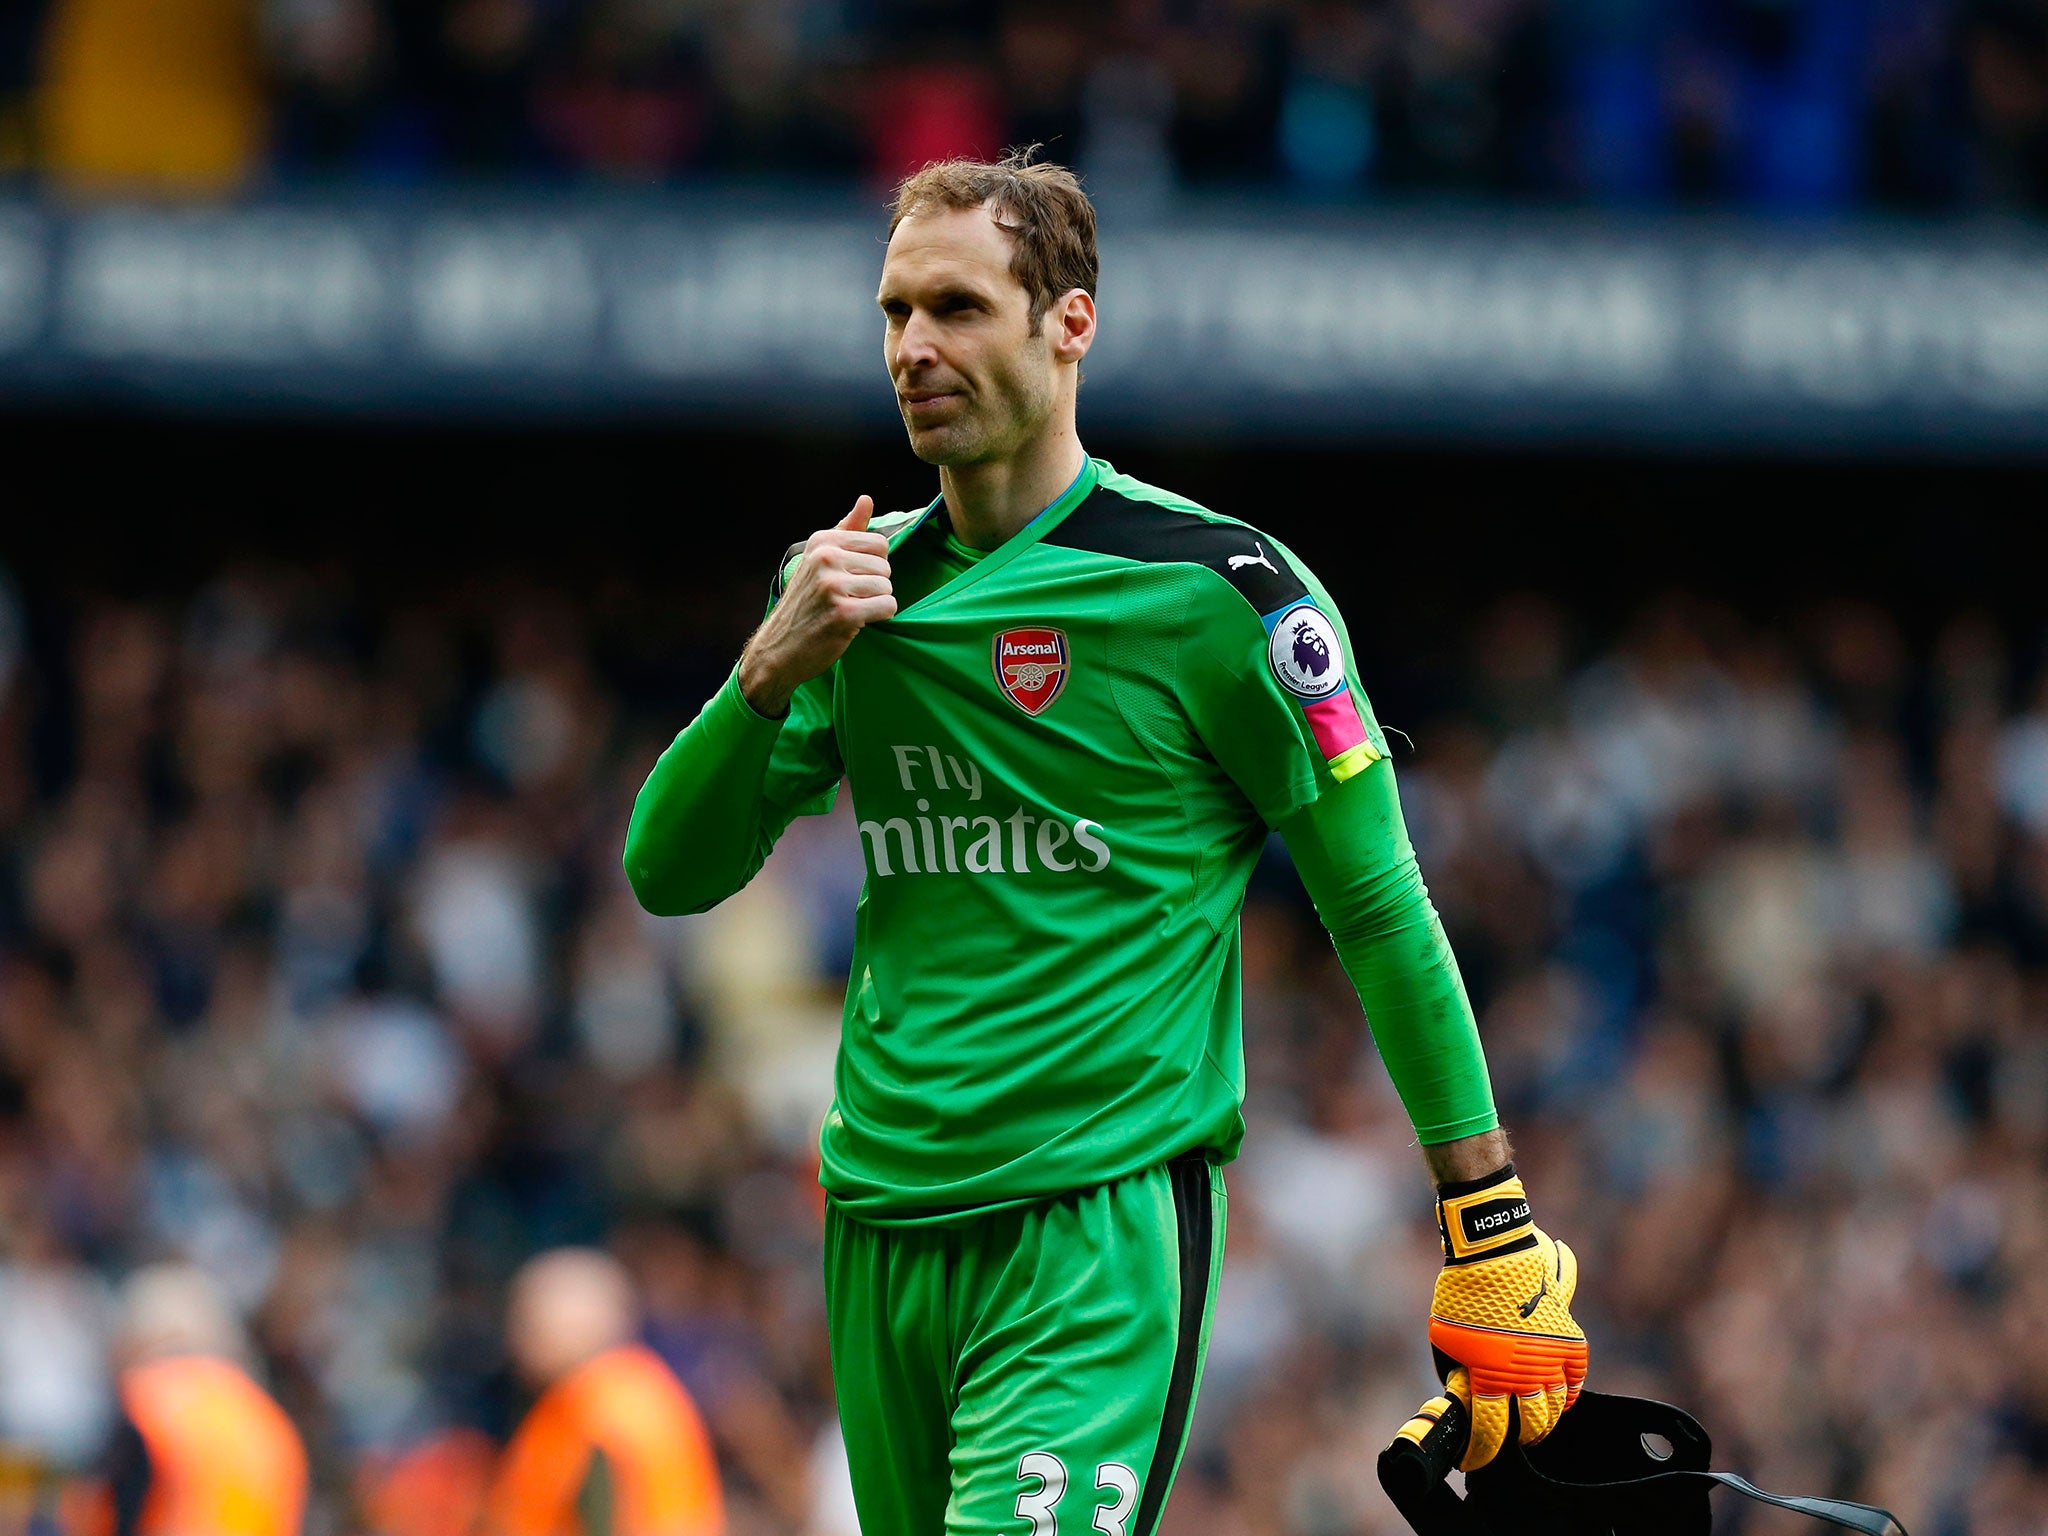 Cech was left disappointed by Sunday's result